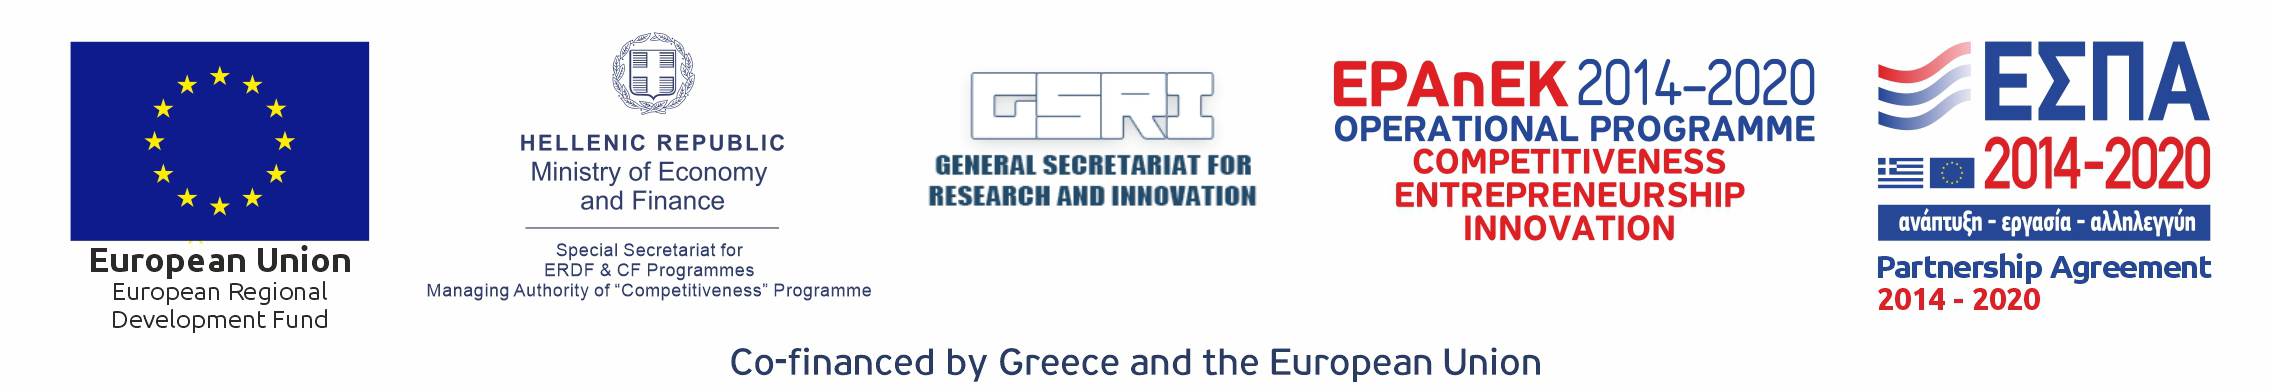 Greek Ministry of Development - General Secretariat for research and innovation